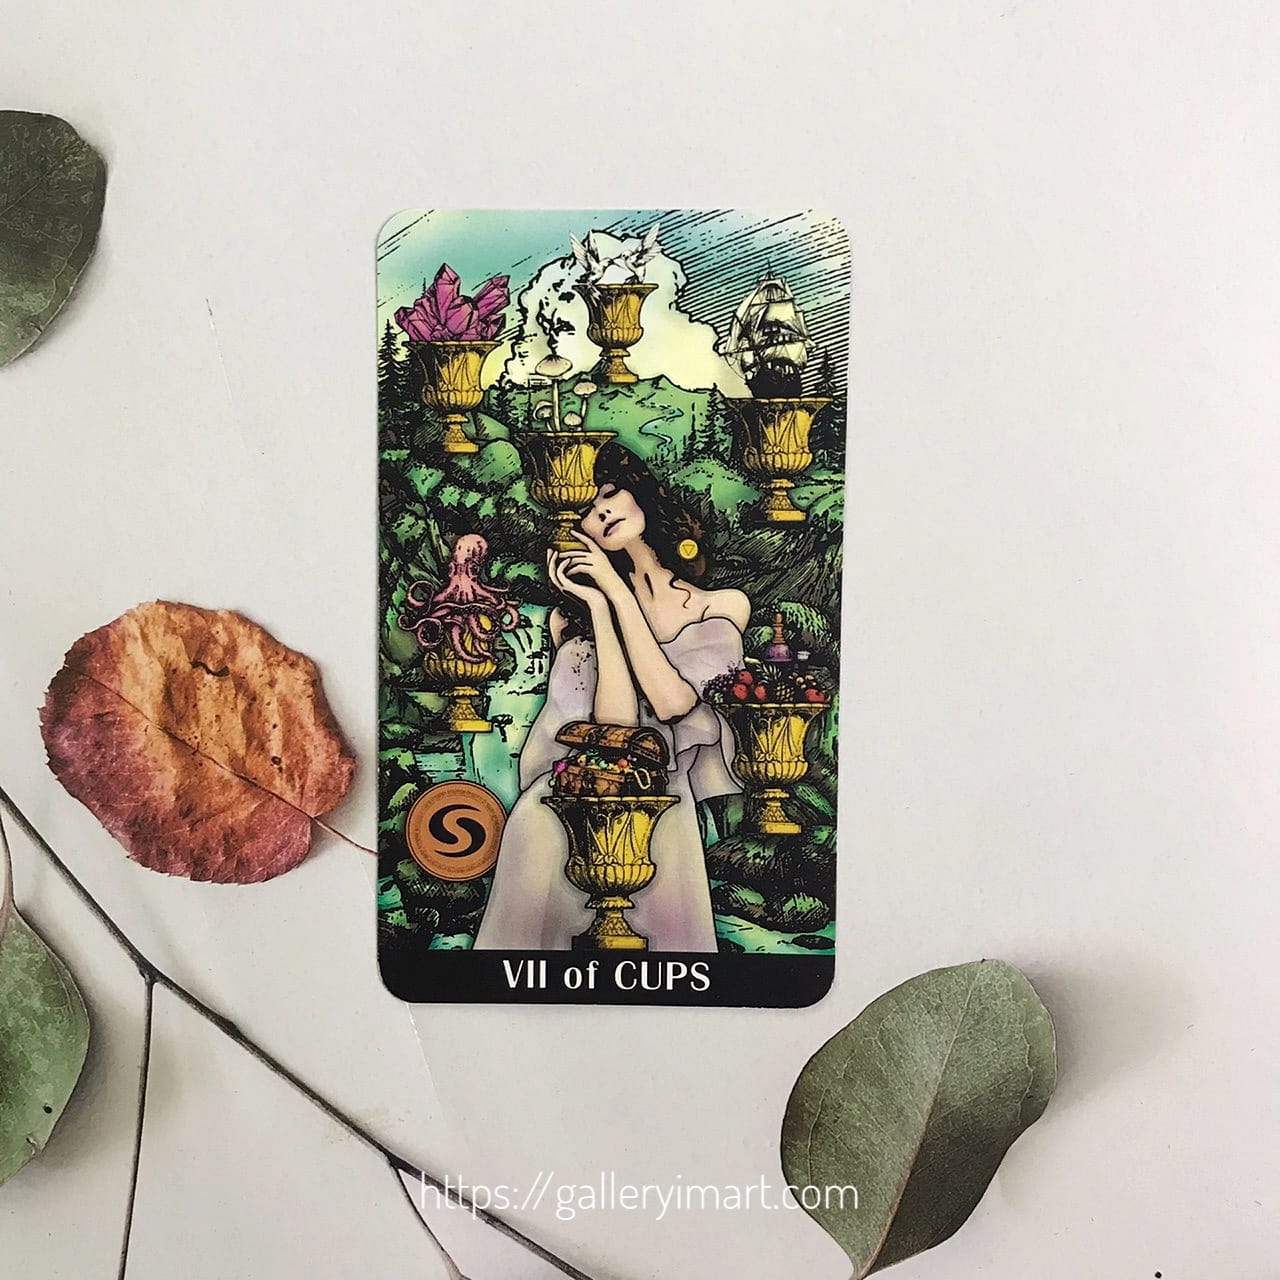 Seven of Cups  Meaning